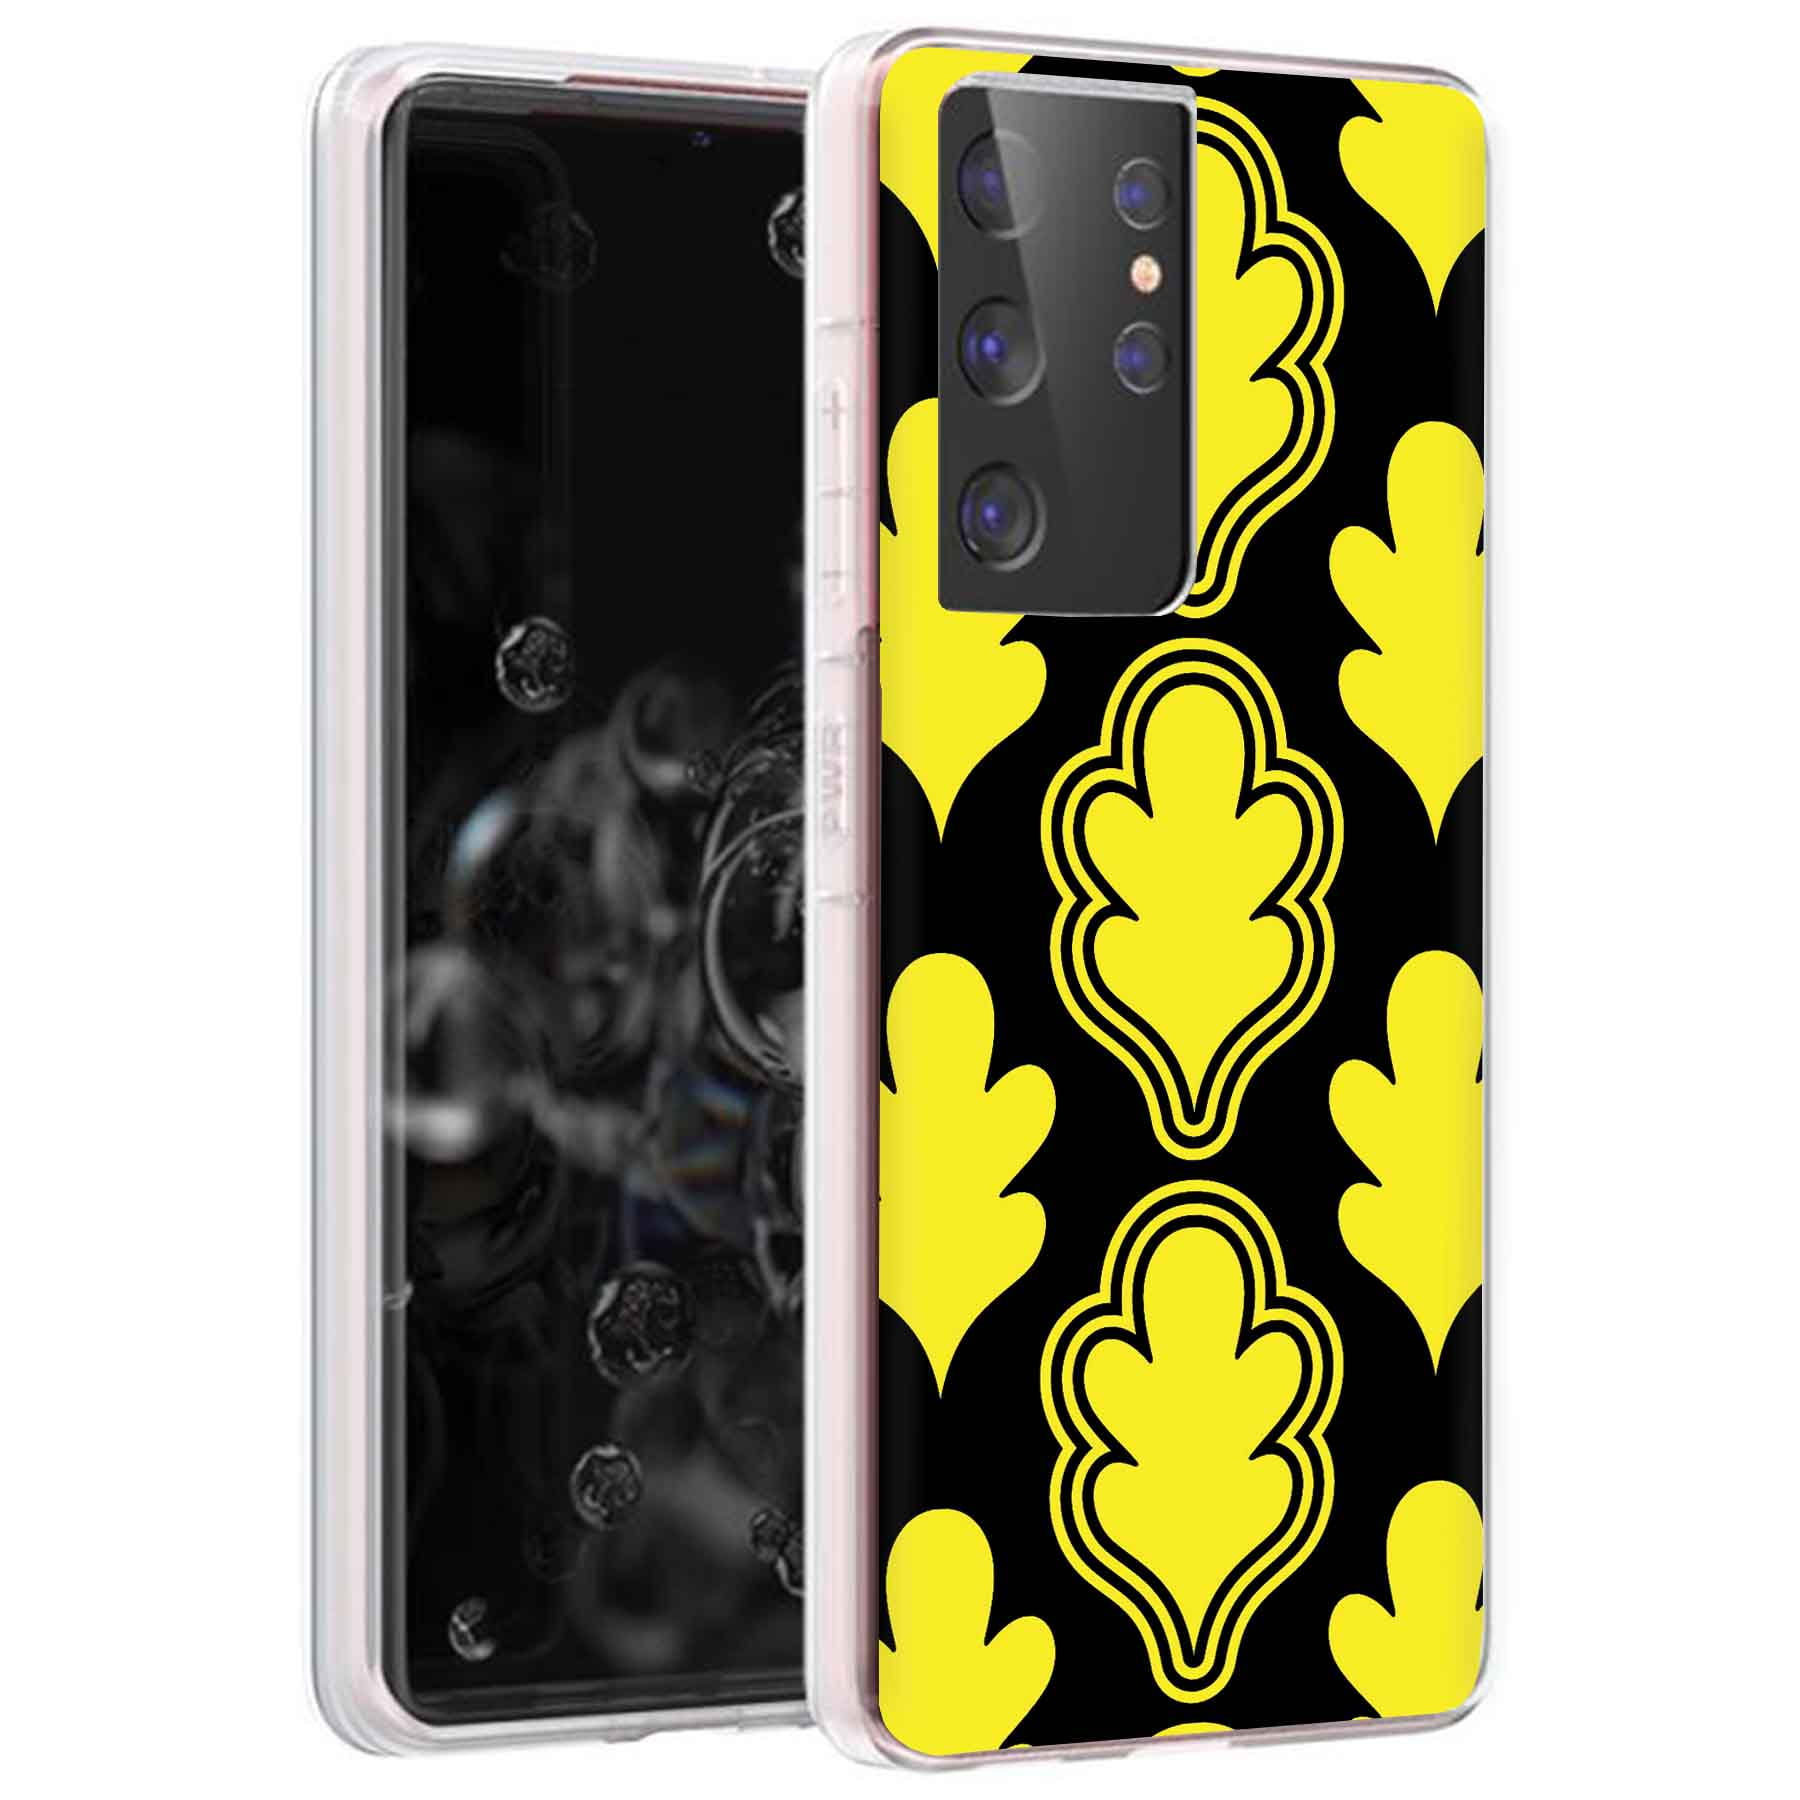 Not S21,S21 Ultra S30+, ,Fruit 5 Print,Light Weight,Flexible,Soft Touch,Anti-Scratch TPU Phone Case for Samsung Galaxy S21+ 5G